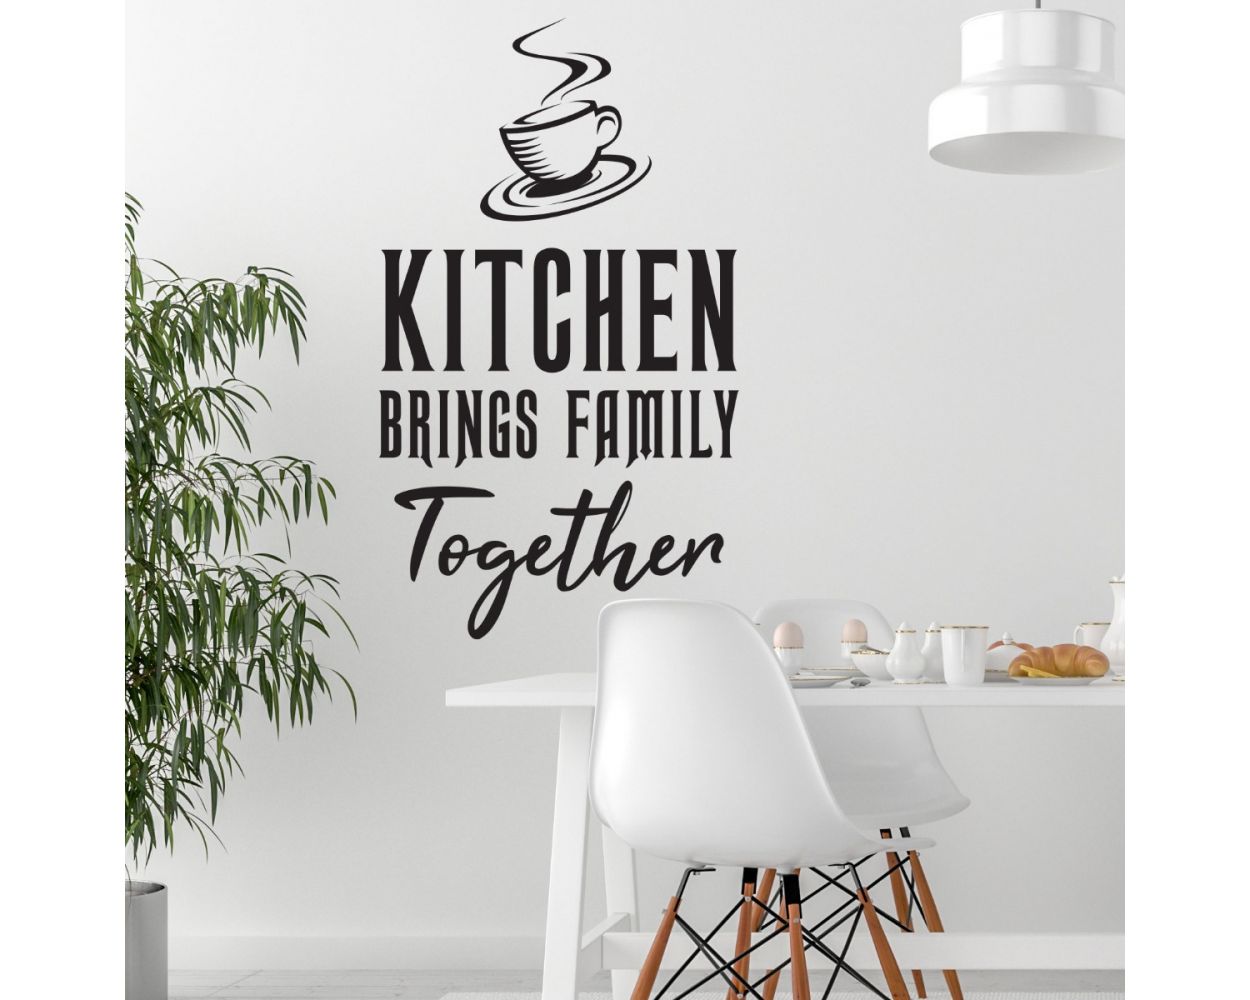 Best Kitchen Brings Family Together Quotes Kitchen Wall Decals 